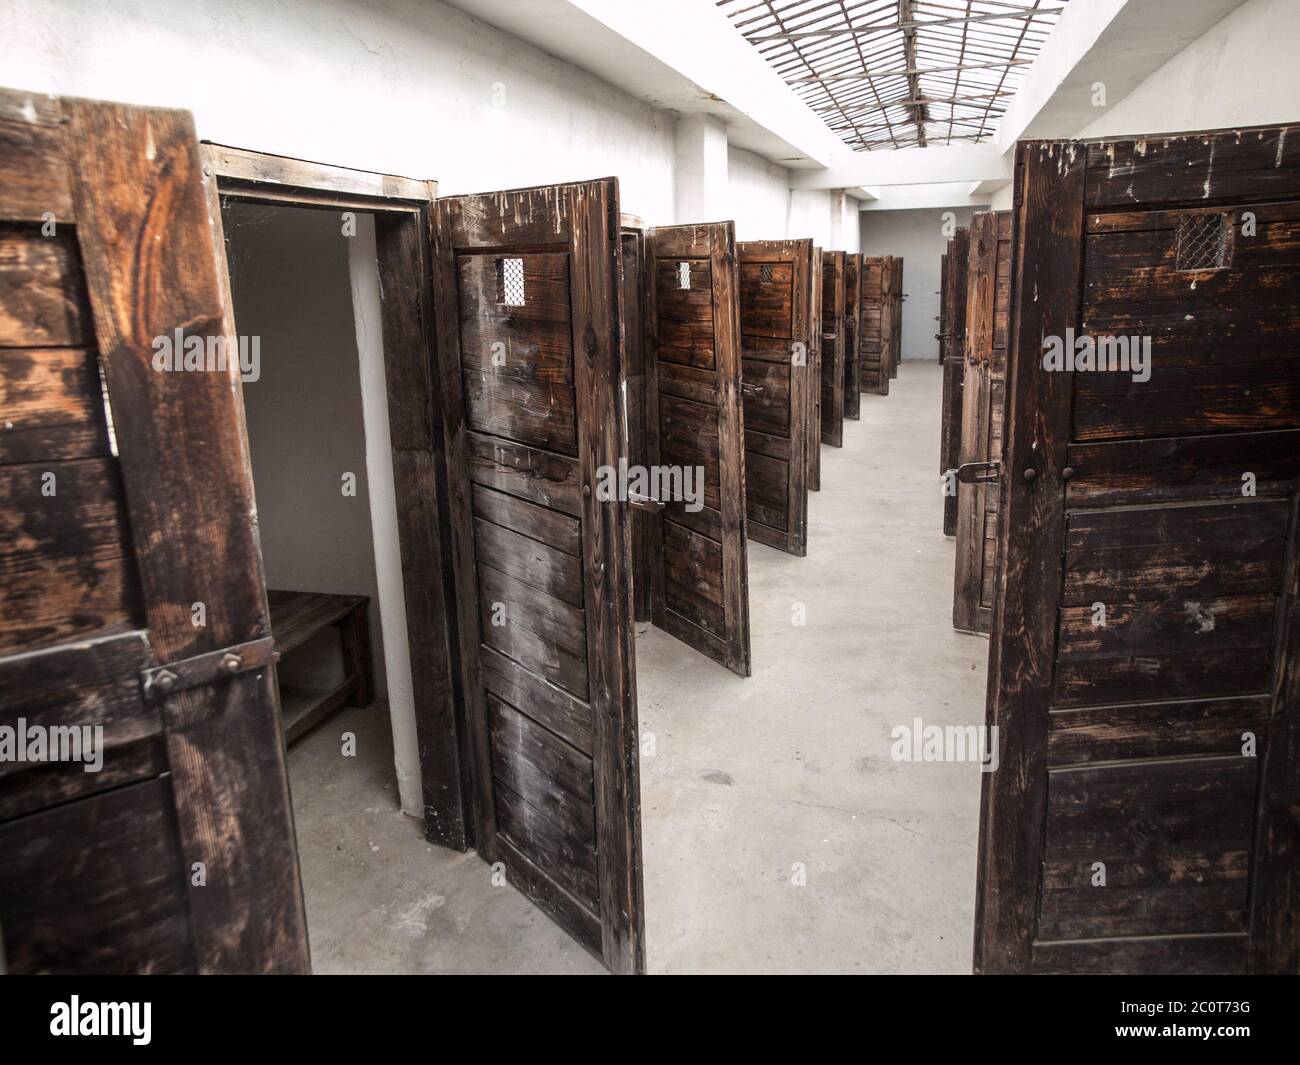 Long corridor with many doors to prison cells. Vintage image. Stock Photo